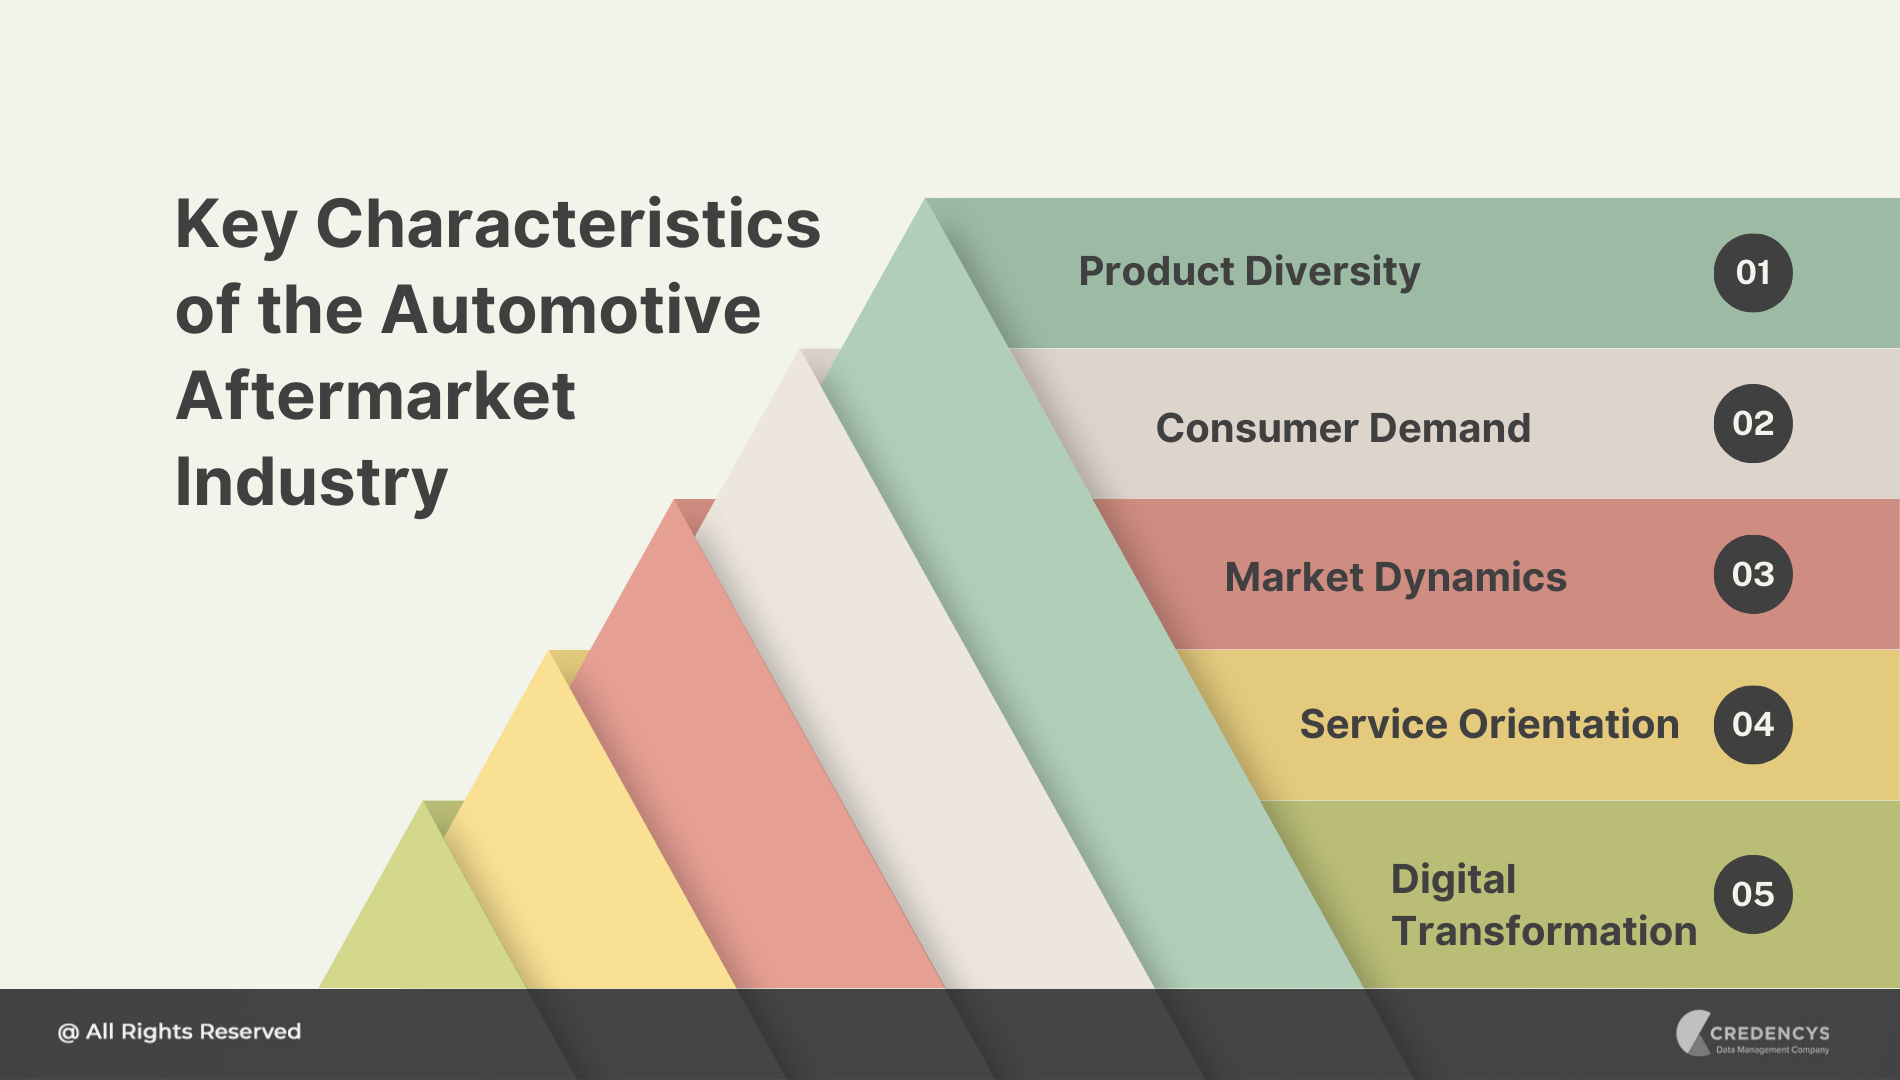 Key Characteristics of the Automotive Aftermarket Industry